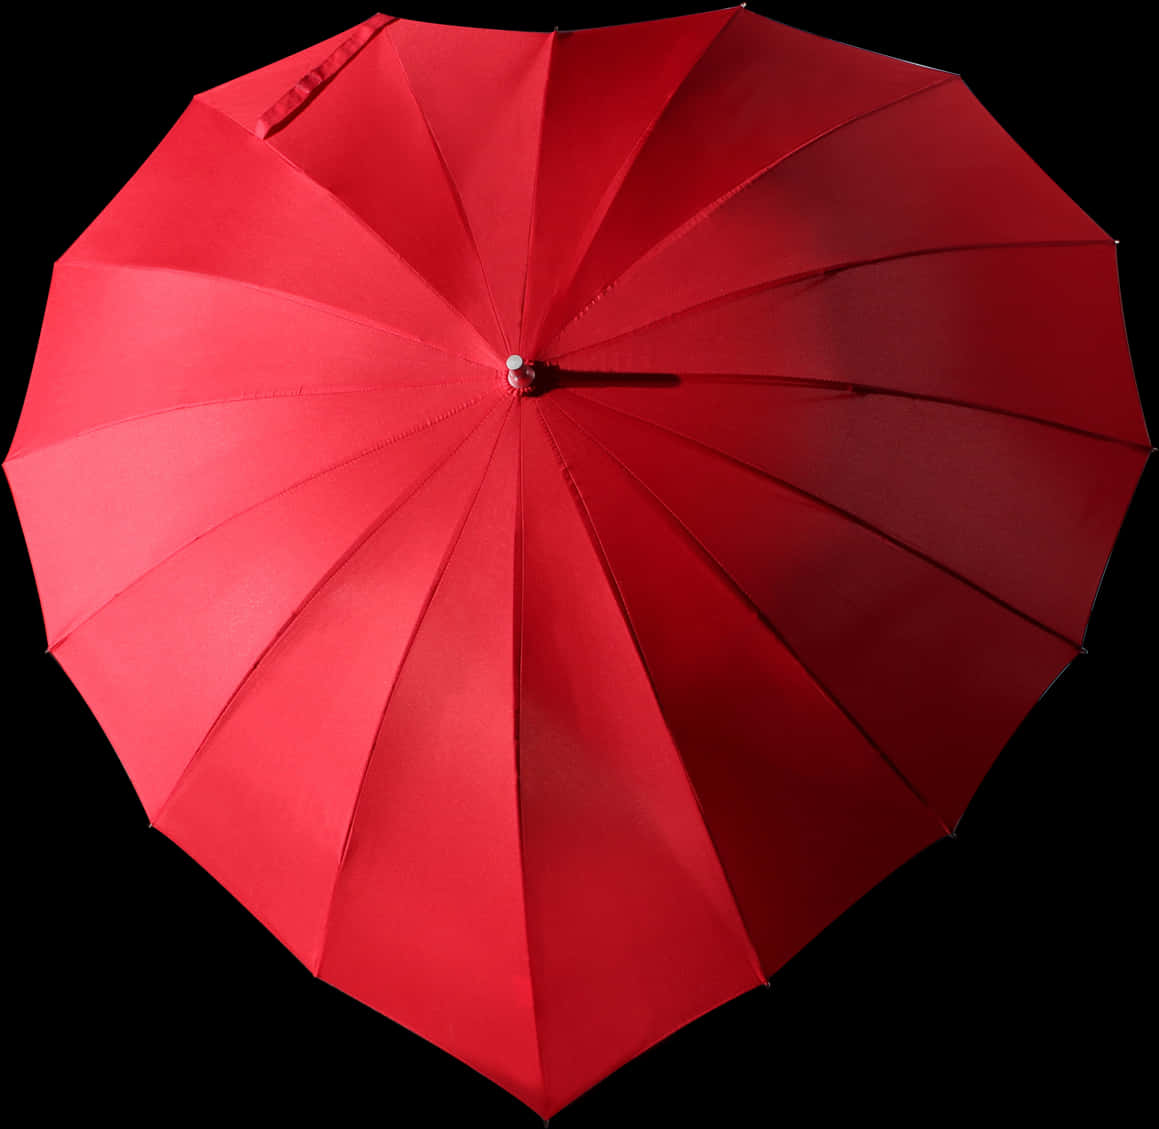 A Red Umbrella With A Black Background